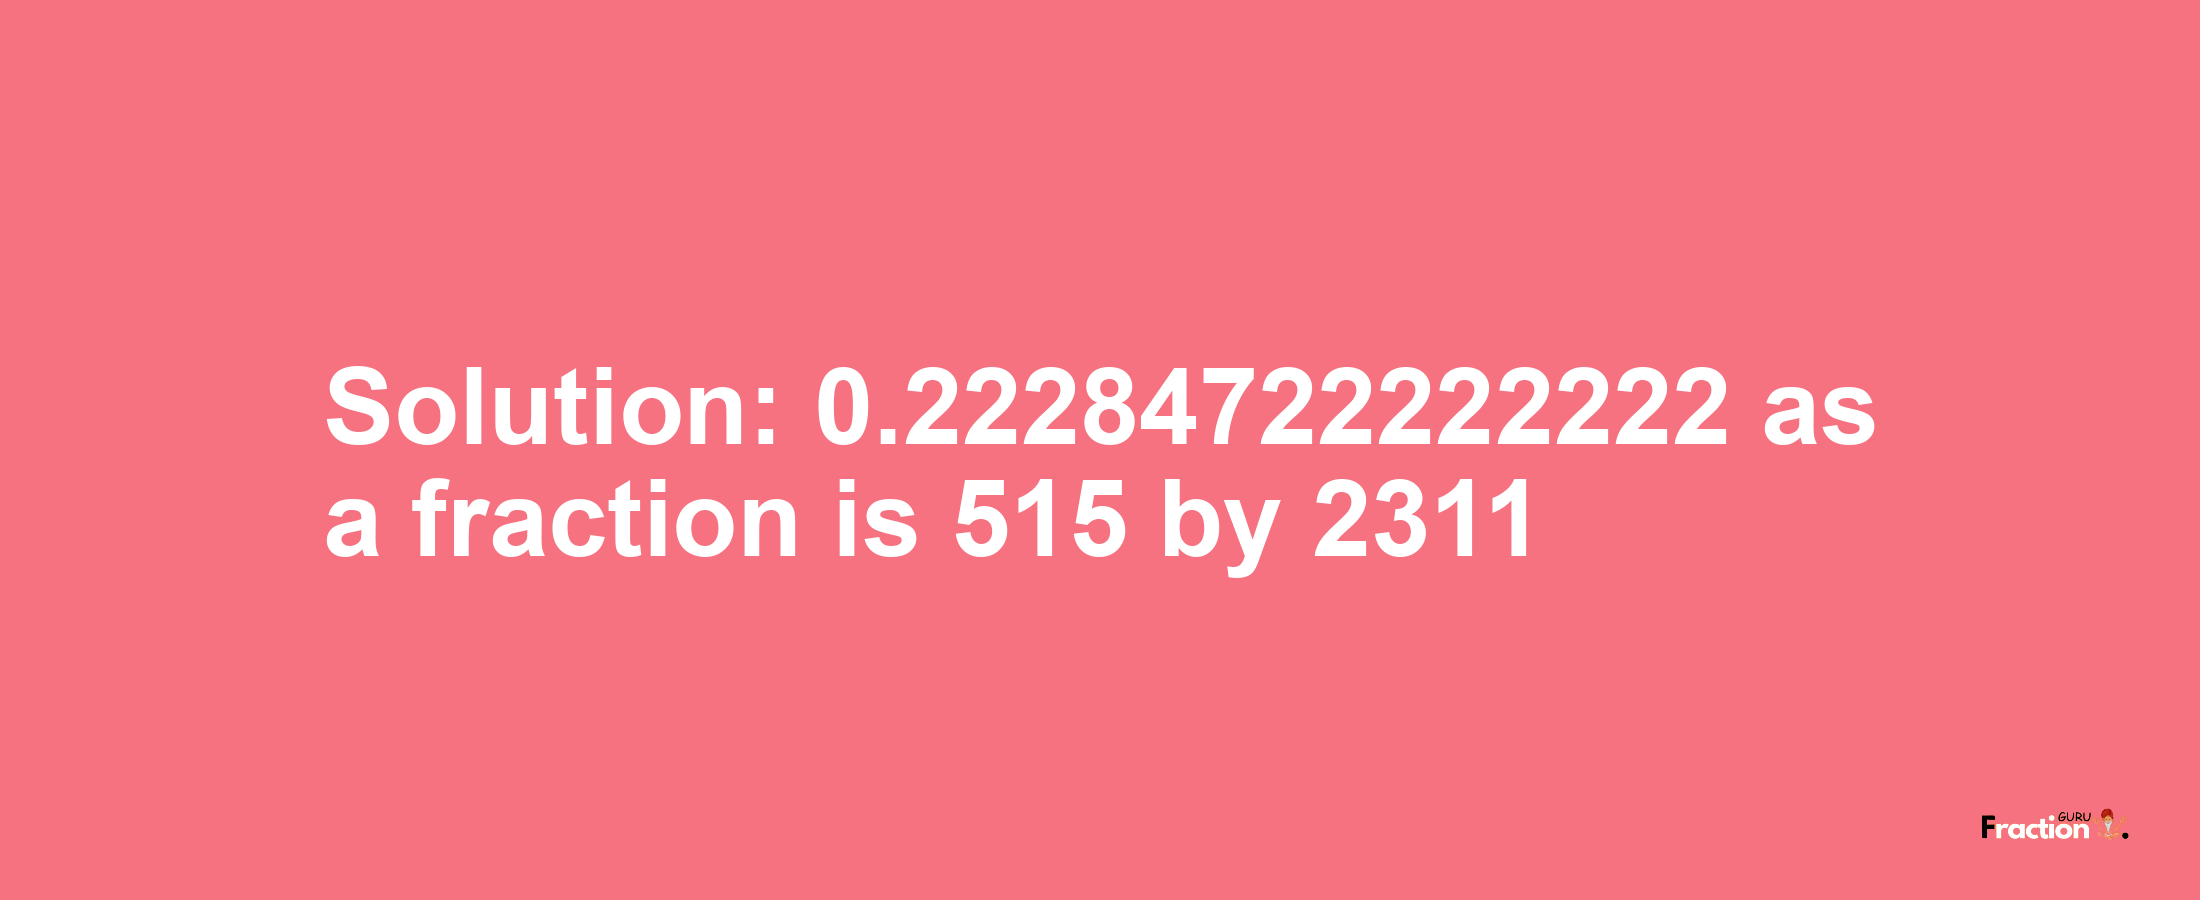 Solution:0.22284722222222 as a fraction is 515/2311